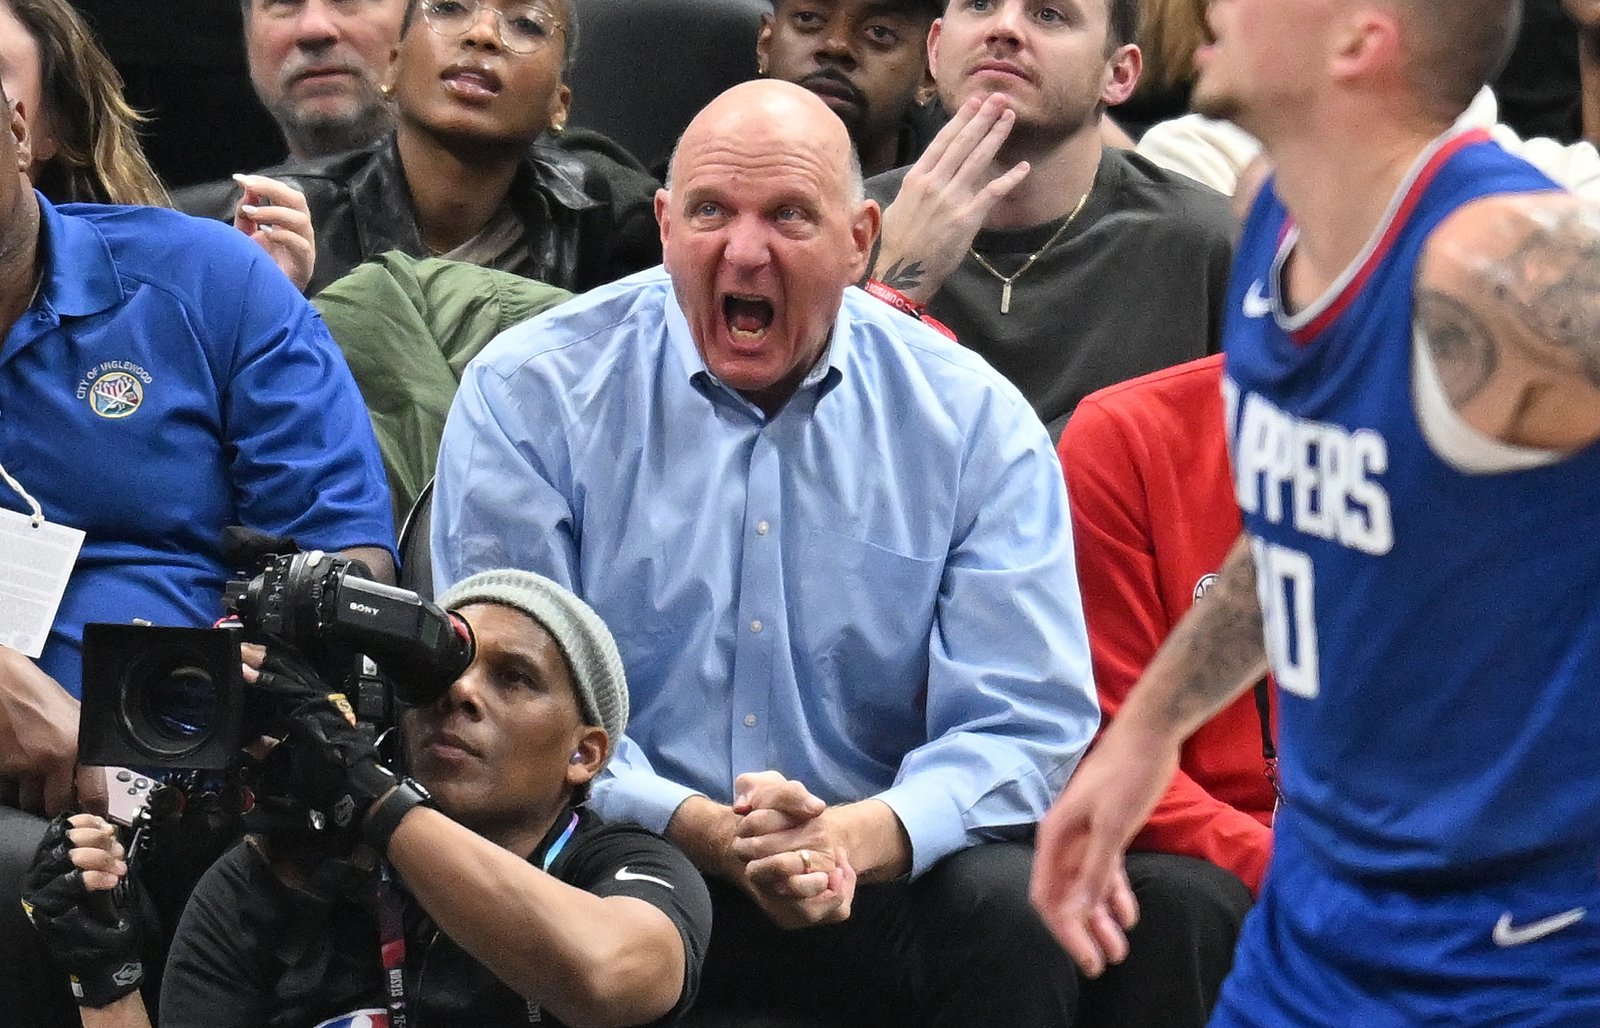 Steve Ballmer Hopes New Uniforms And Logos Can Change The Fundamental Clipperness Of The Whole Situation